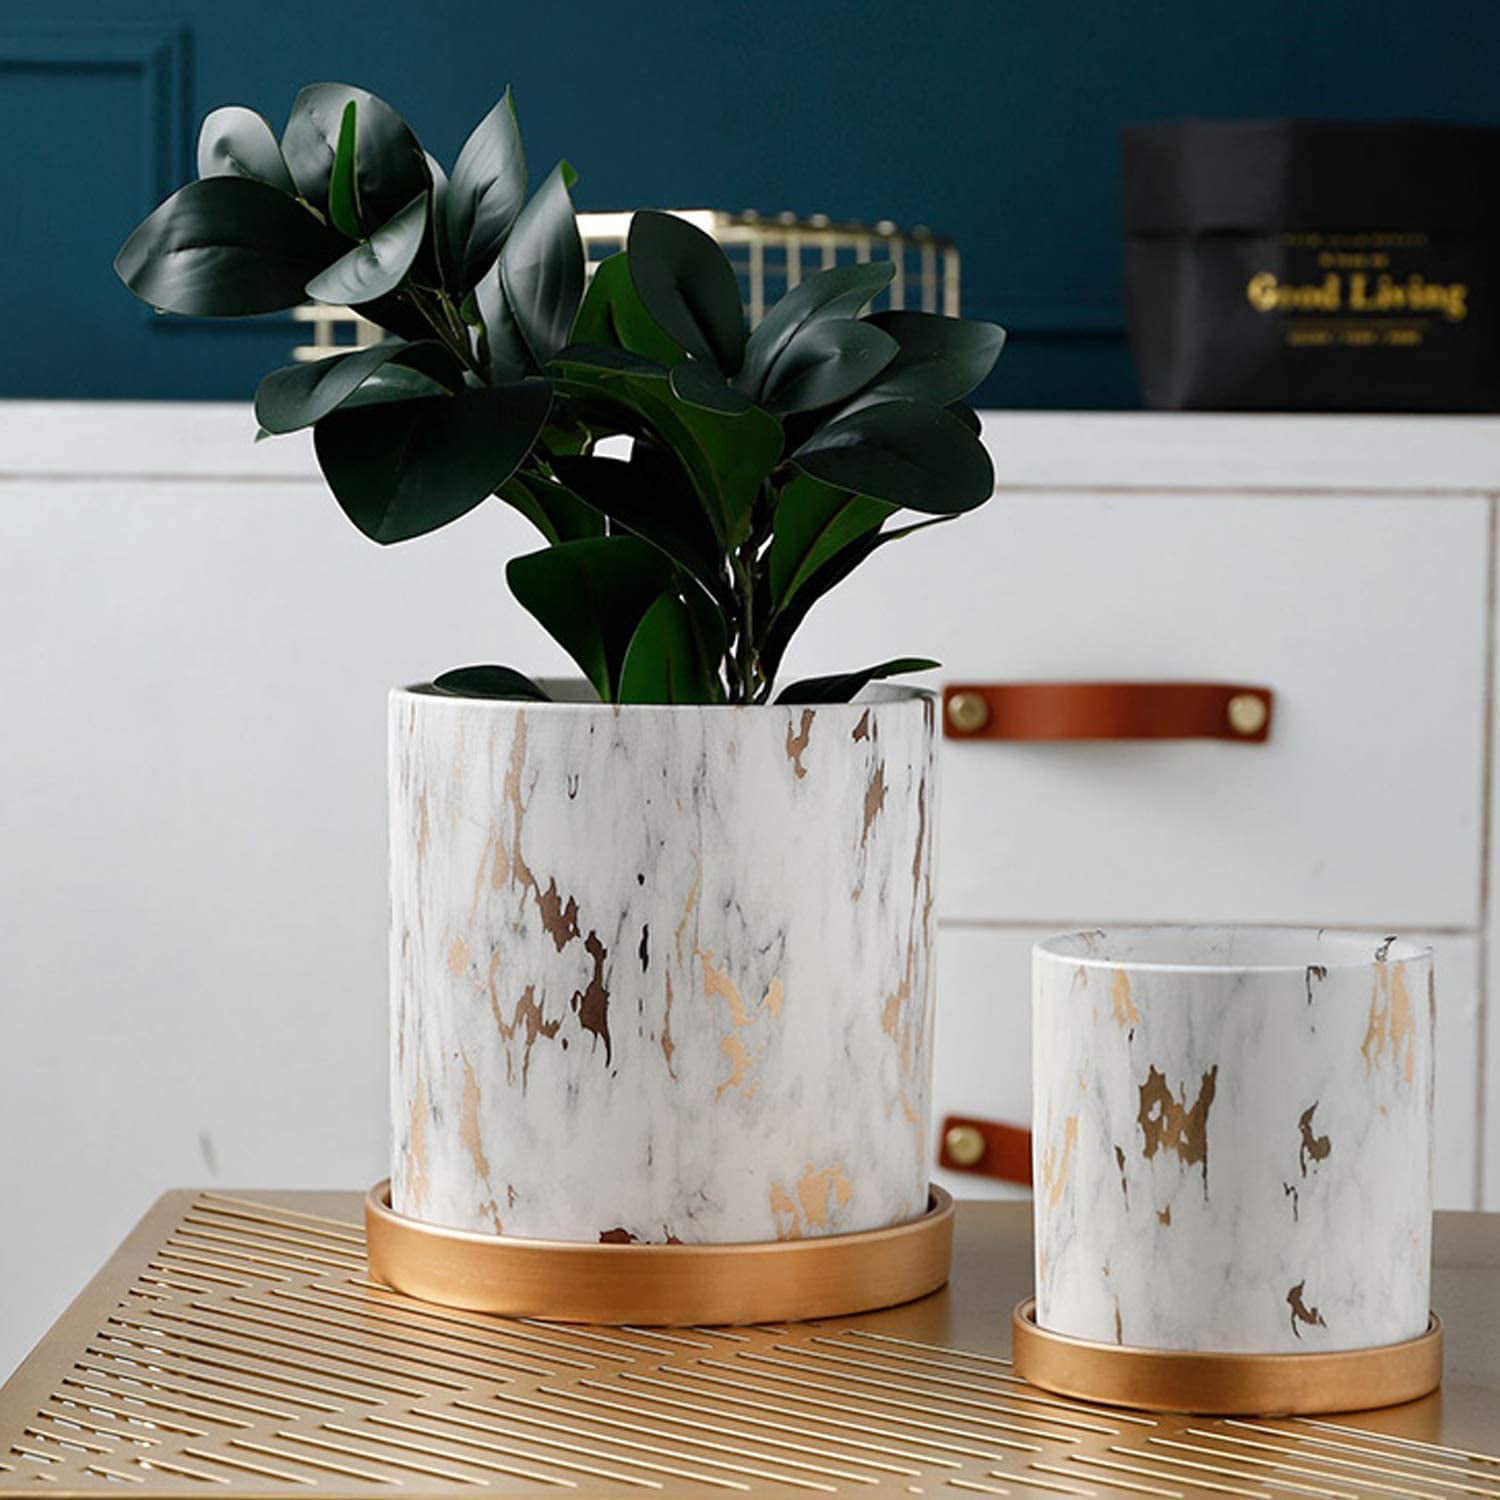 Details about   Ceramic Flowerpot Marble Pattern Ceramic Flower Pot With Drain Hole And Tray 